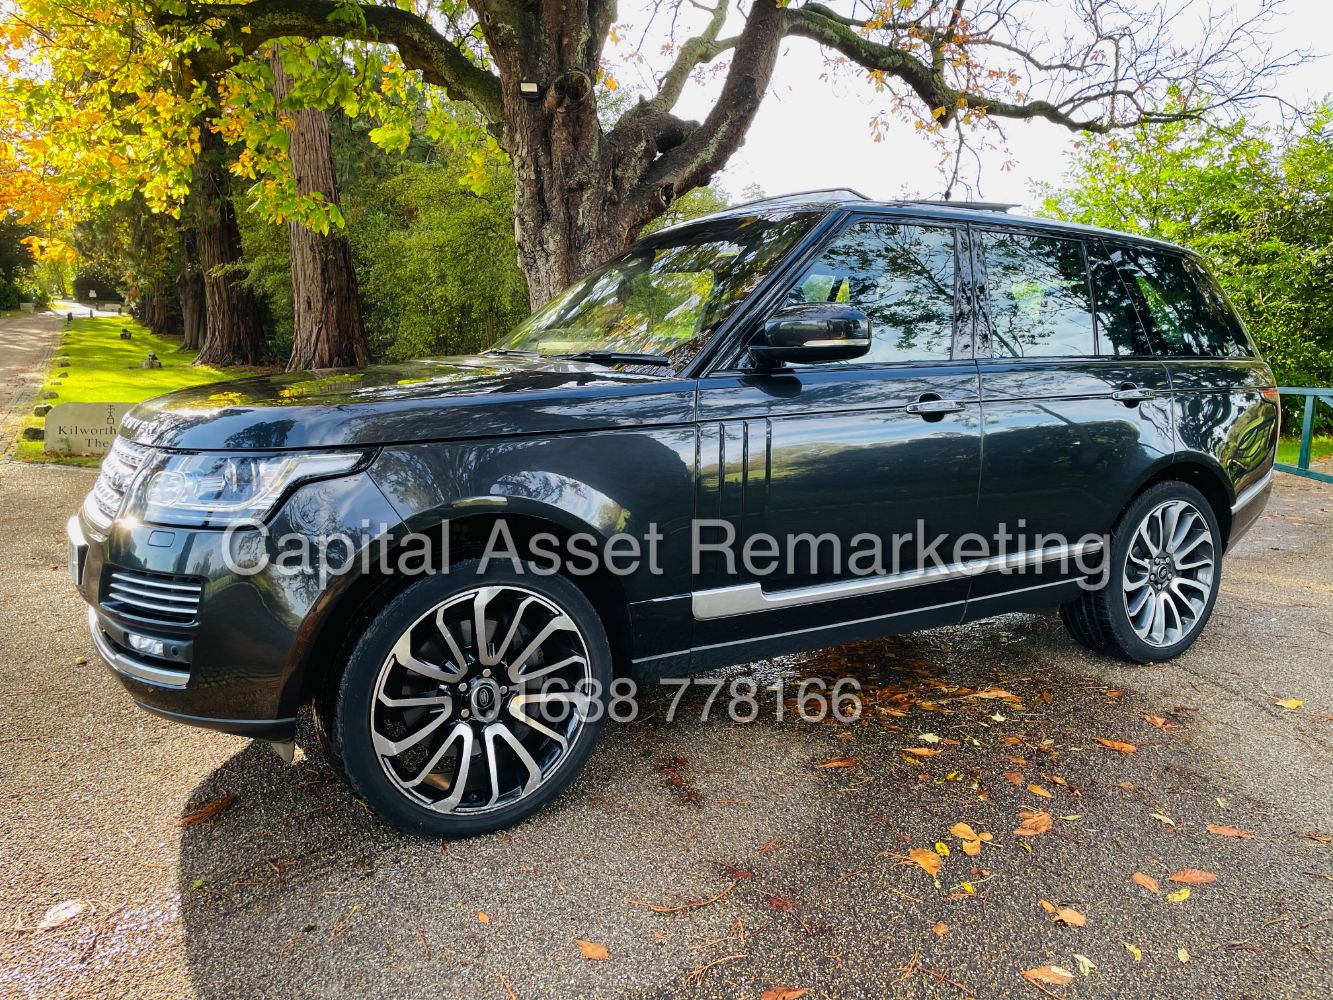 2021 Bailey Phoenix *Luxury Caravan* - 2018 Land Rover Discovery Sport - Range Rover *Vogue SE* SDV8 + Many More: Cars, Commercials & 4x4's !!!